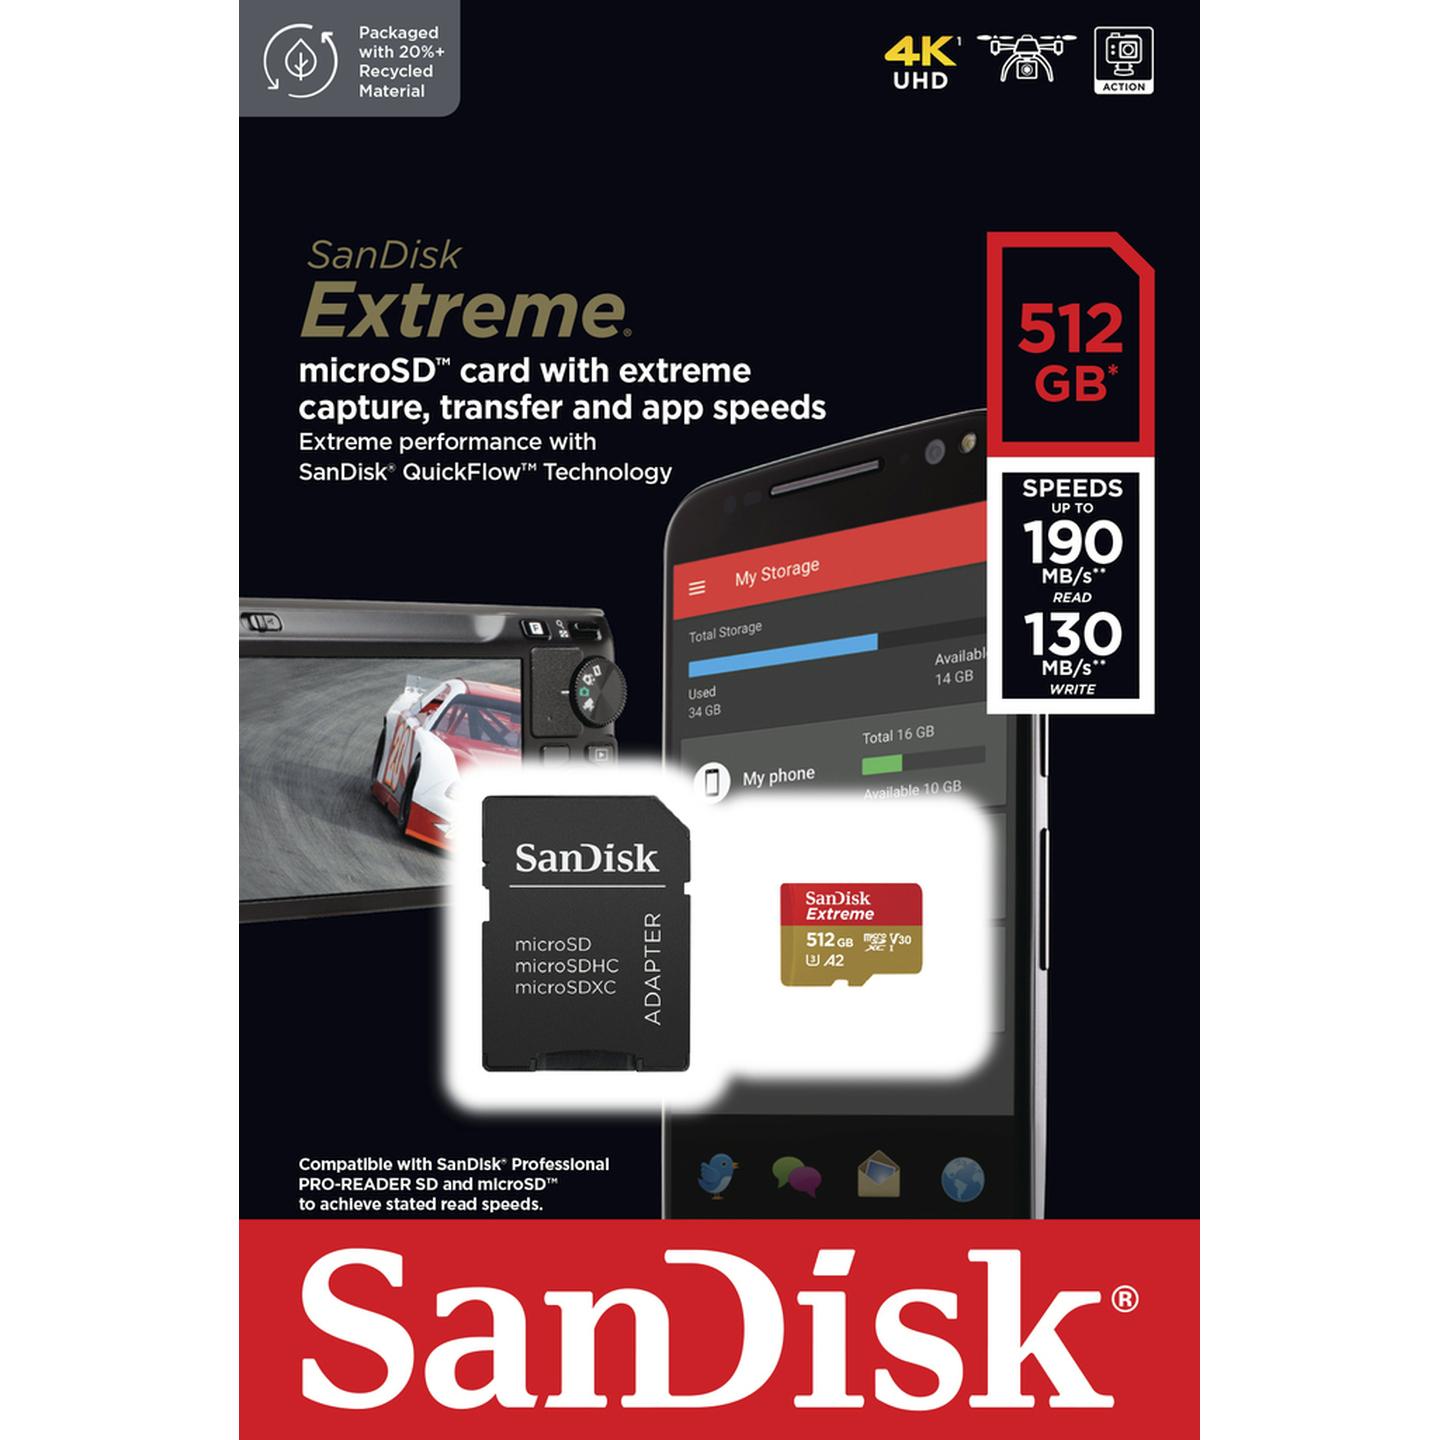 Sandisk 512GB High Extreme microSDXC Class 10 Reads 190MB/S Writes 130MB/S 